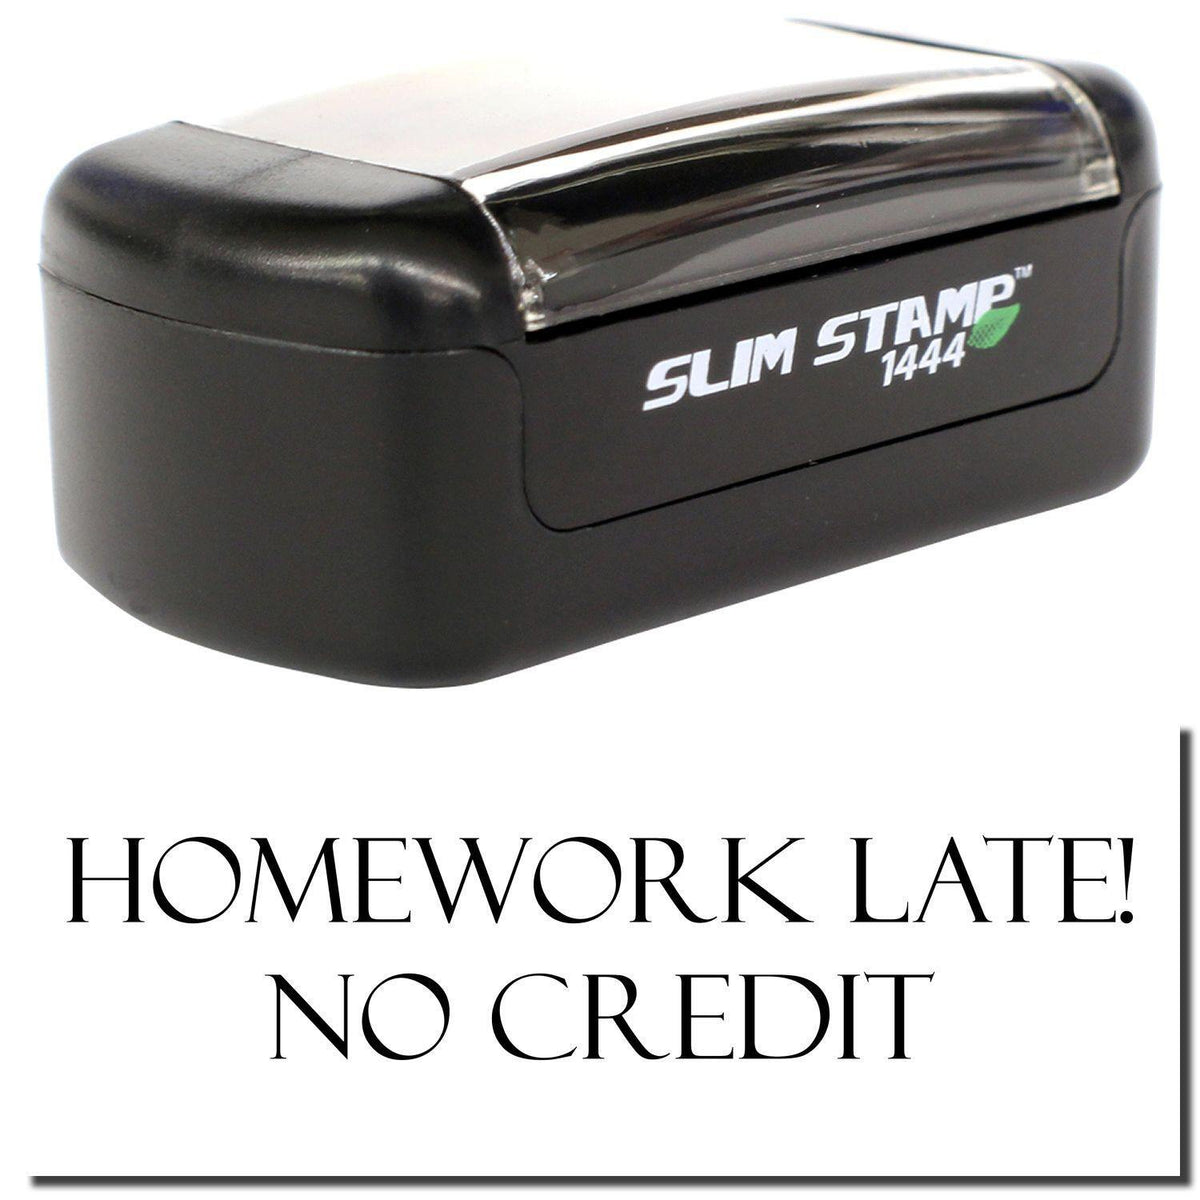 A stock office pre-inked stamp with a stamped image showing how the text &quot;HOMEWORK LATE! NO CREDIT&quot; is displayed after stamping.